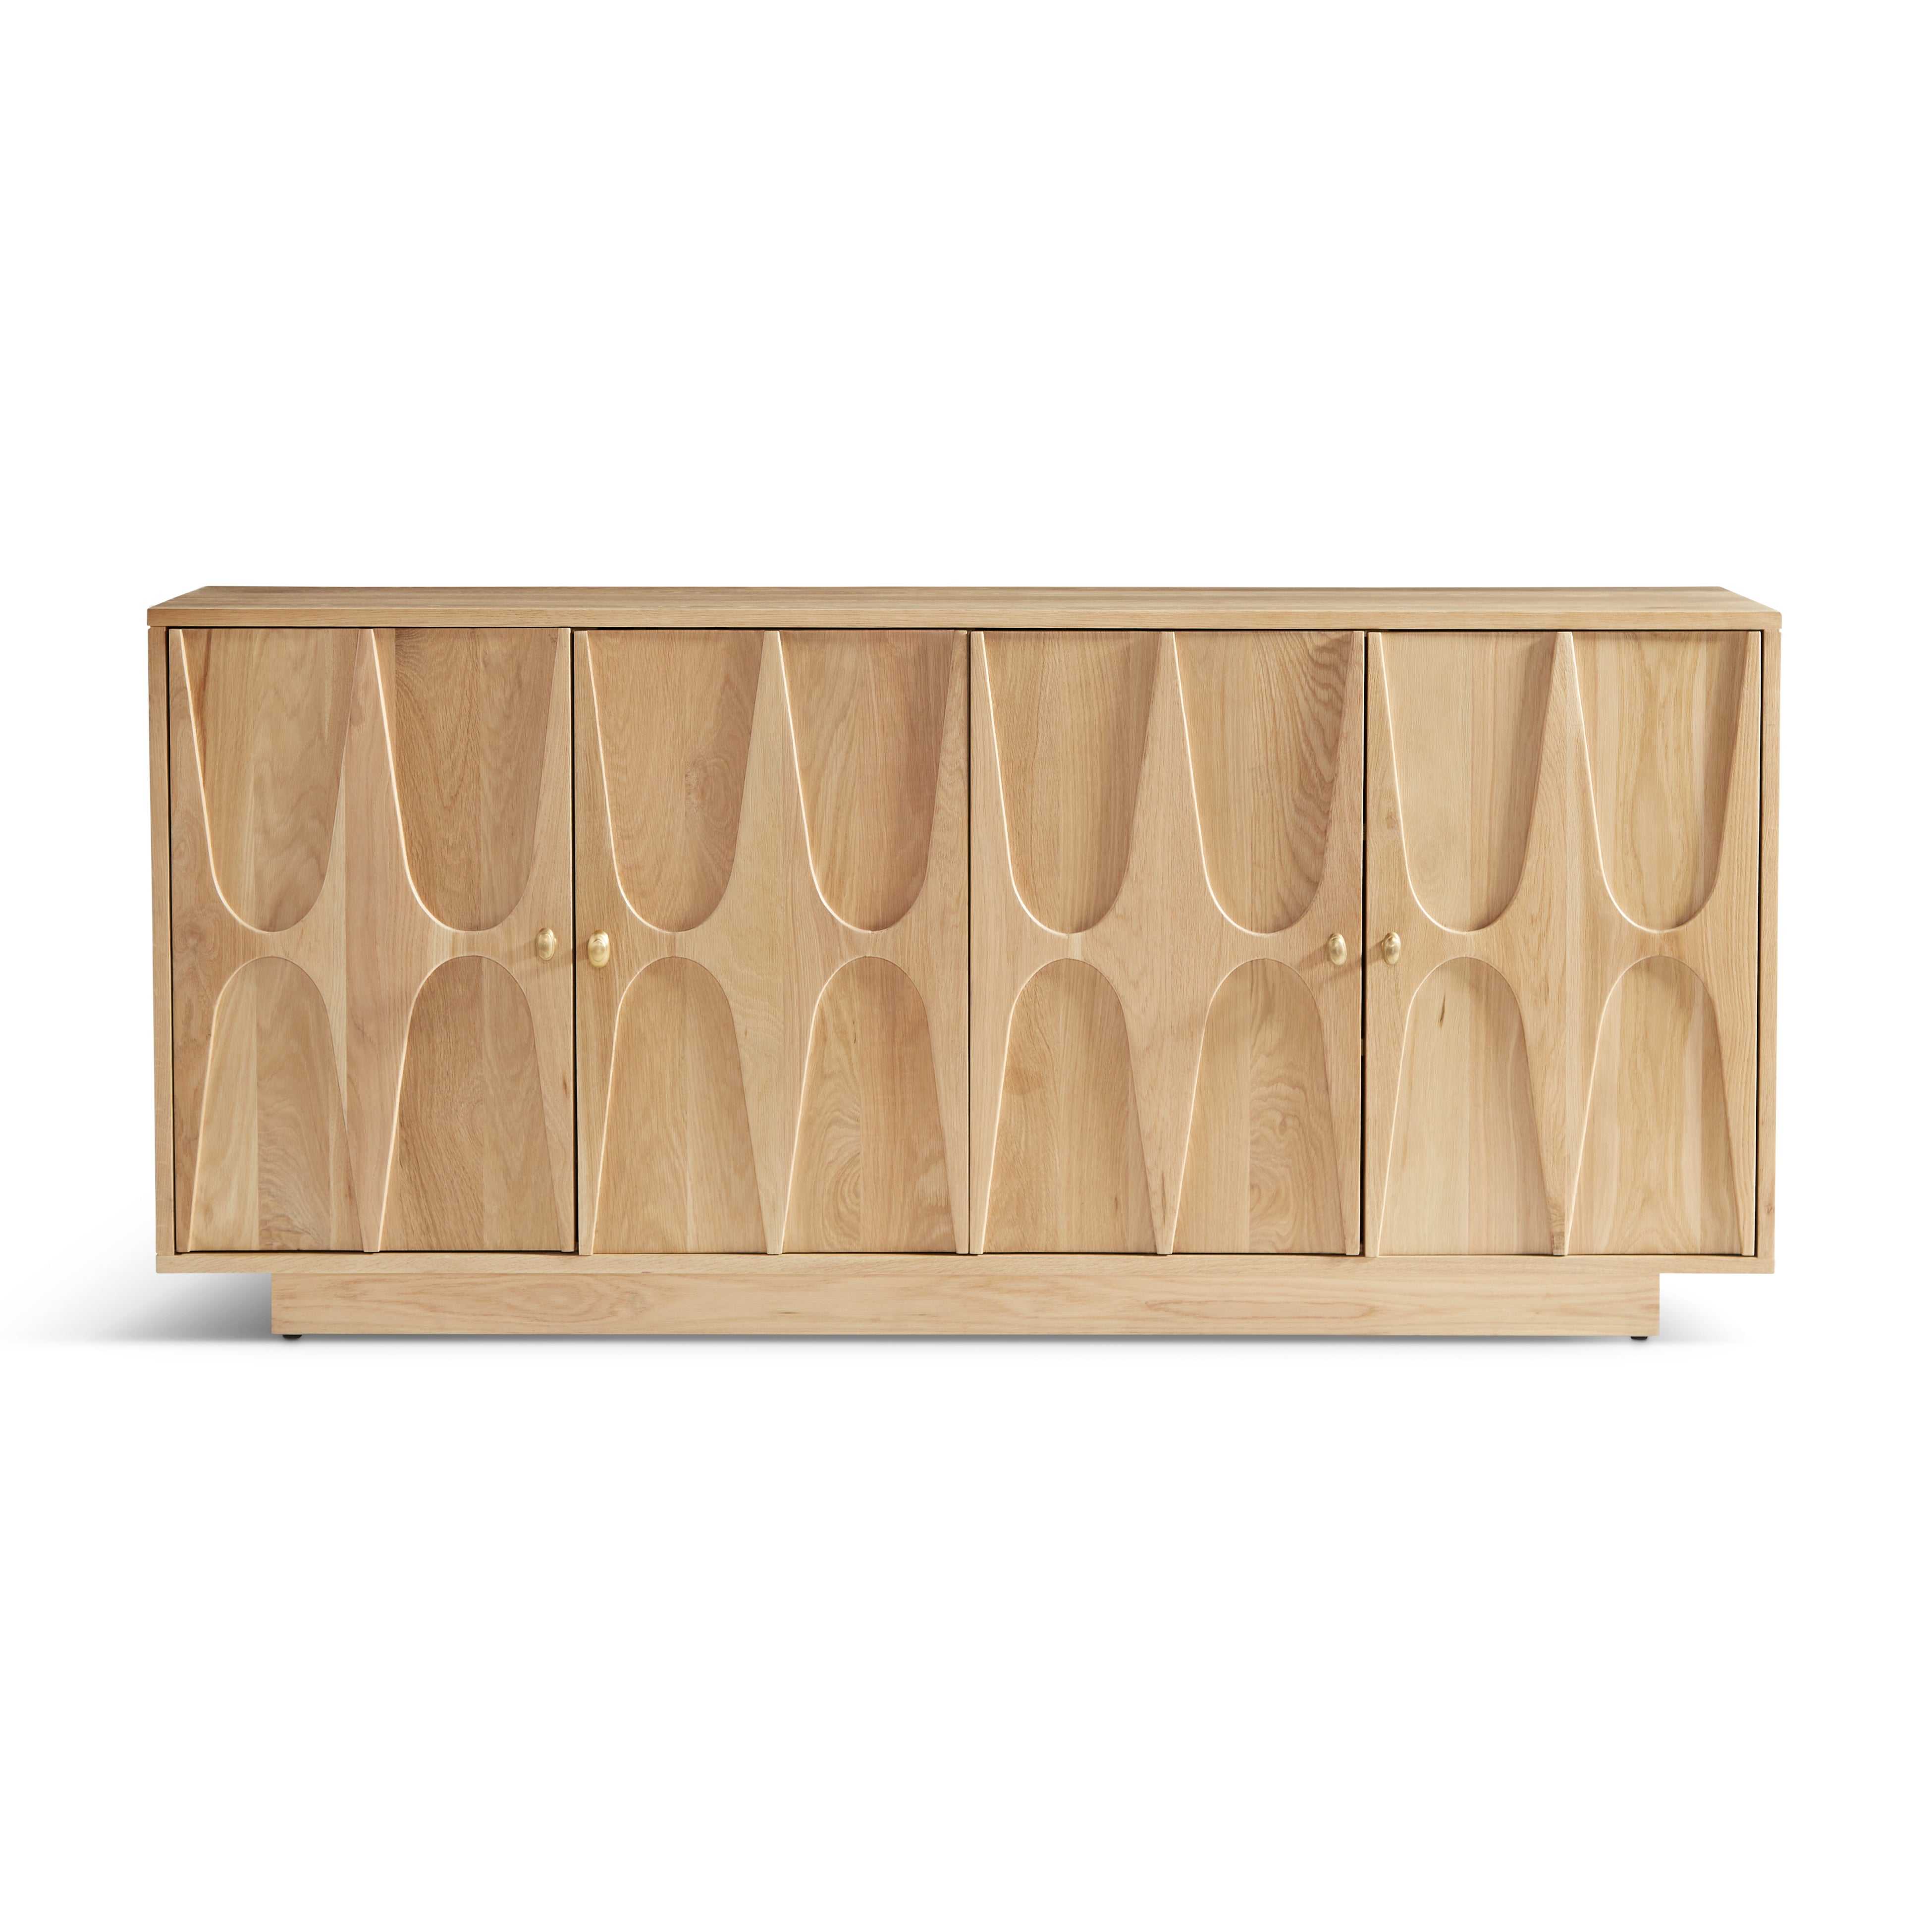 Union Home, Roma Sideboard